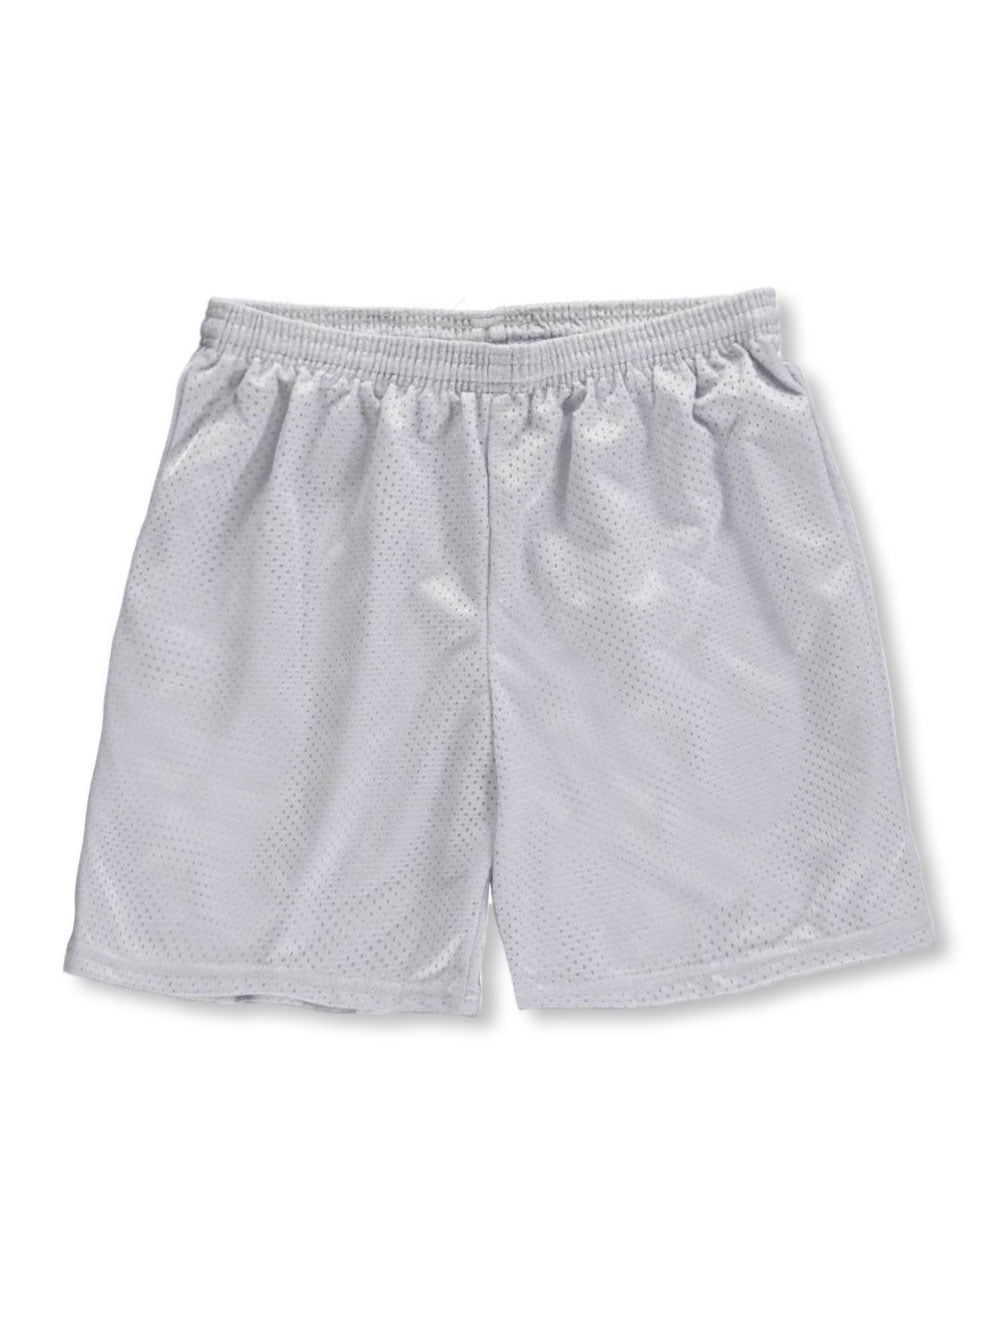 5/6 & 7 Details about   Boys STX $17 Green & Gray Athletic Shorts Sizes 4 